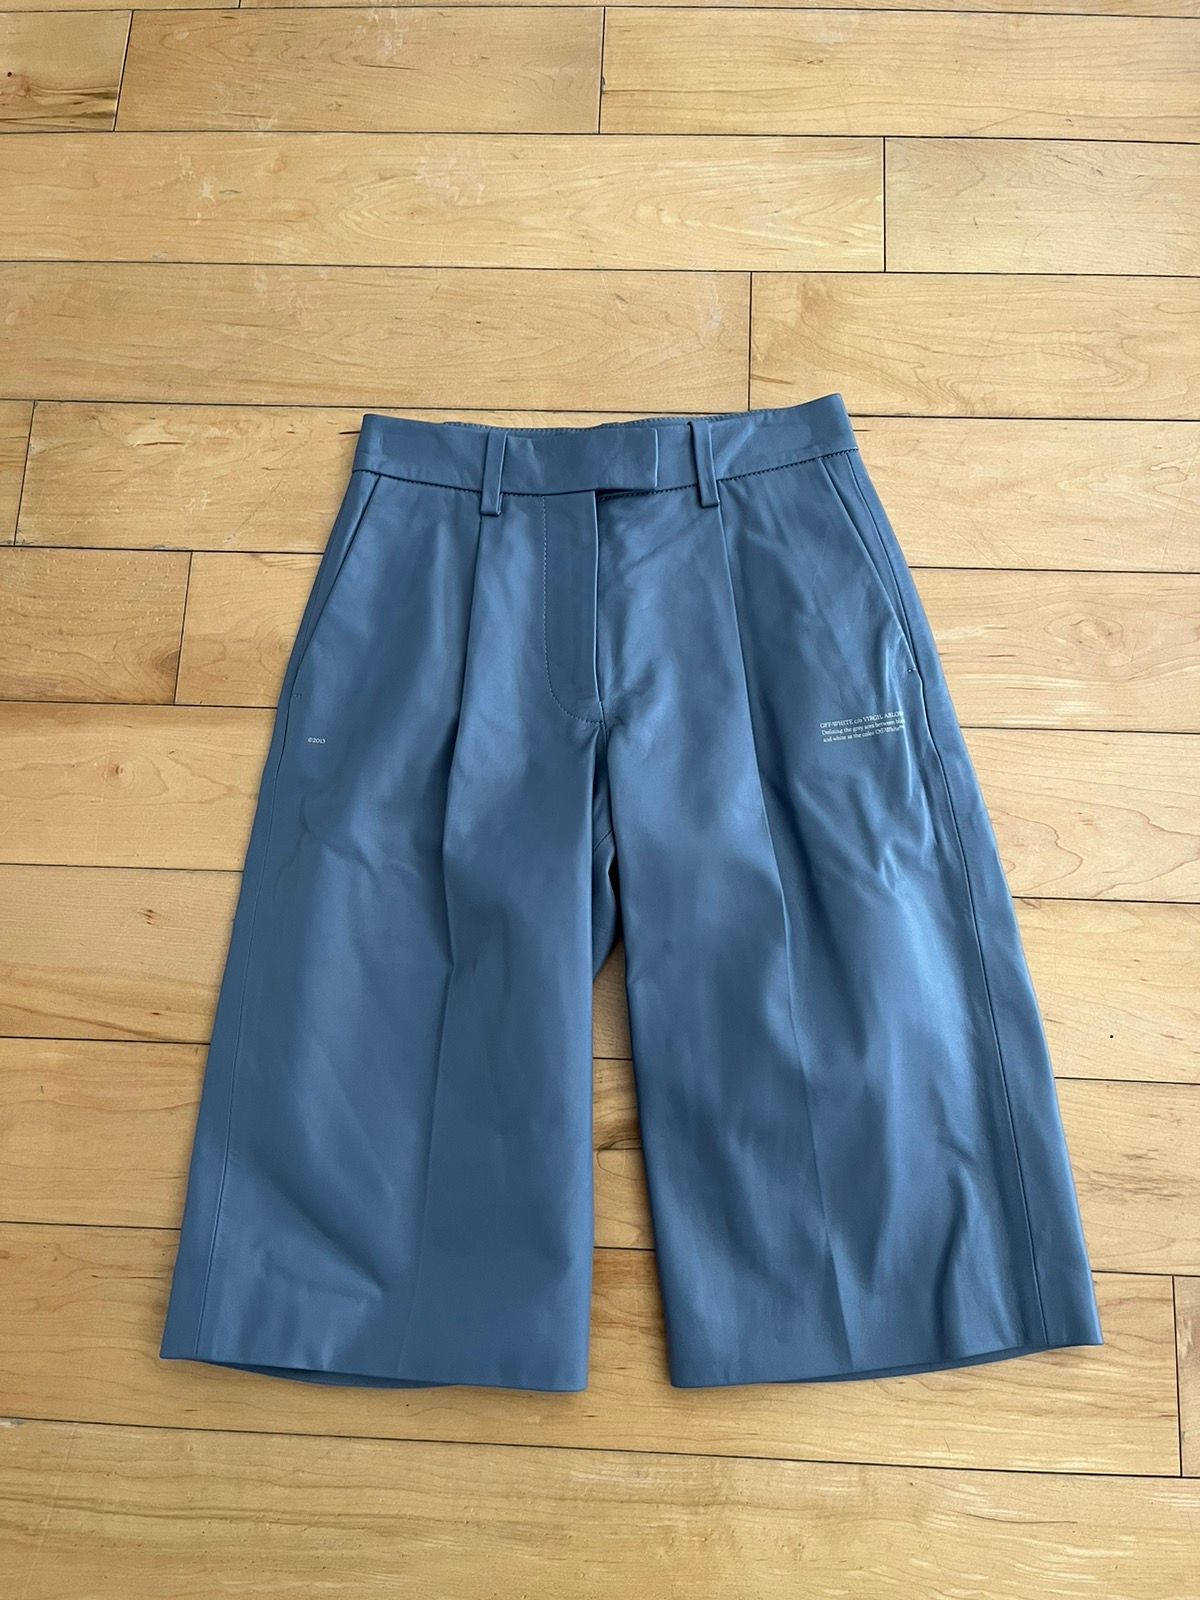 NWT - Off-White Leather Formal Pleated Short - 1